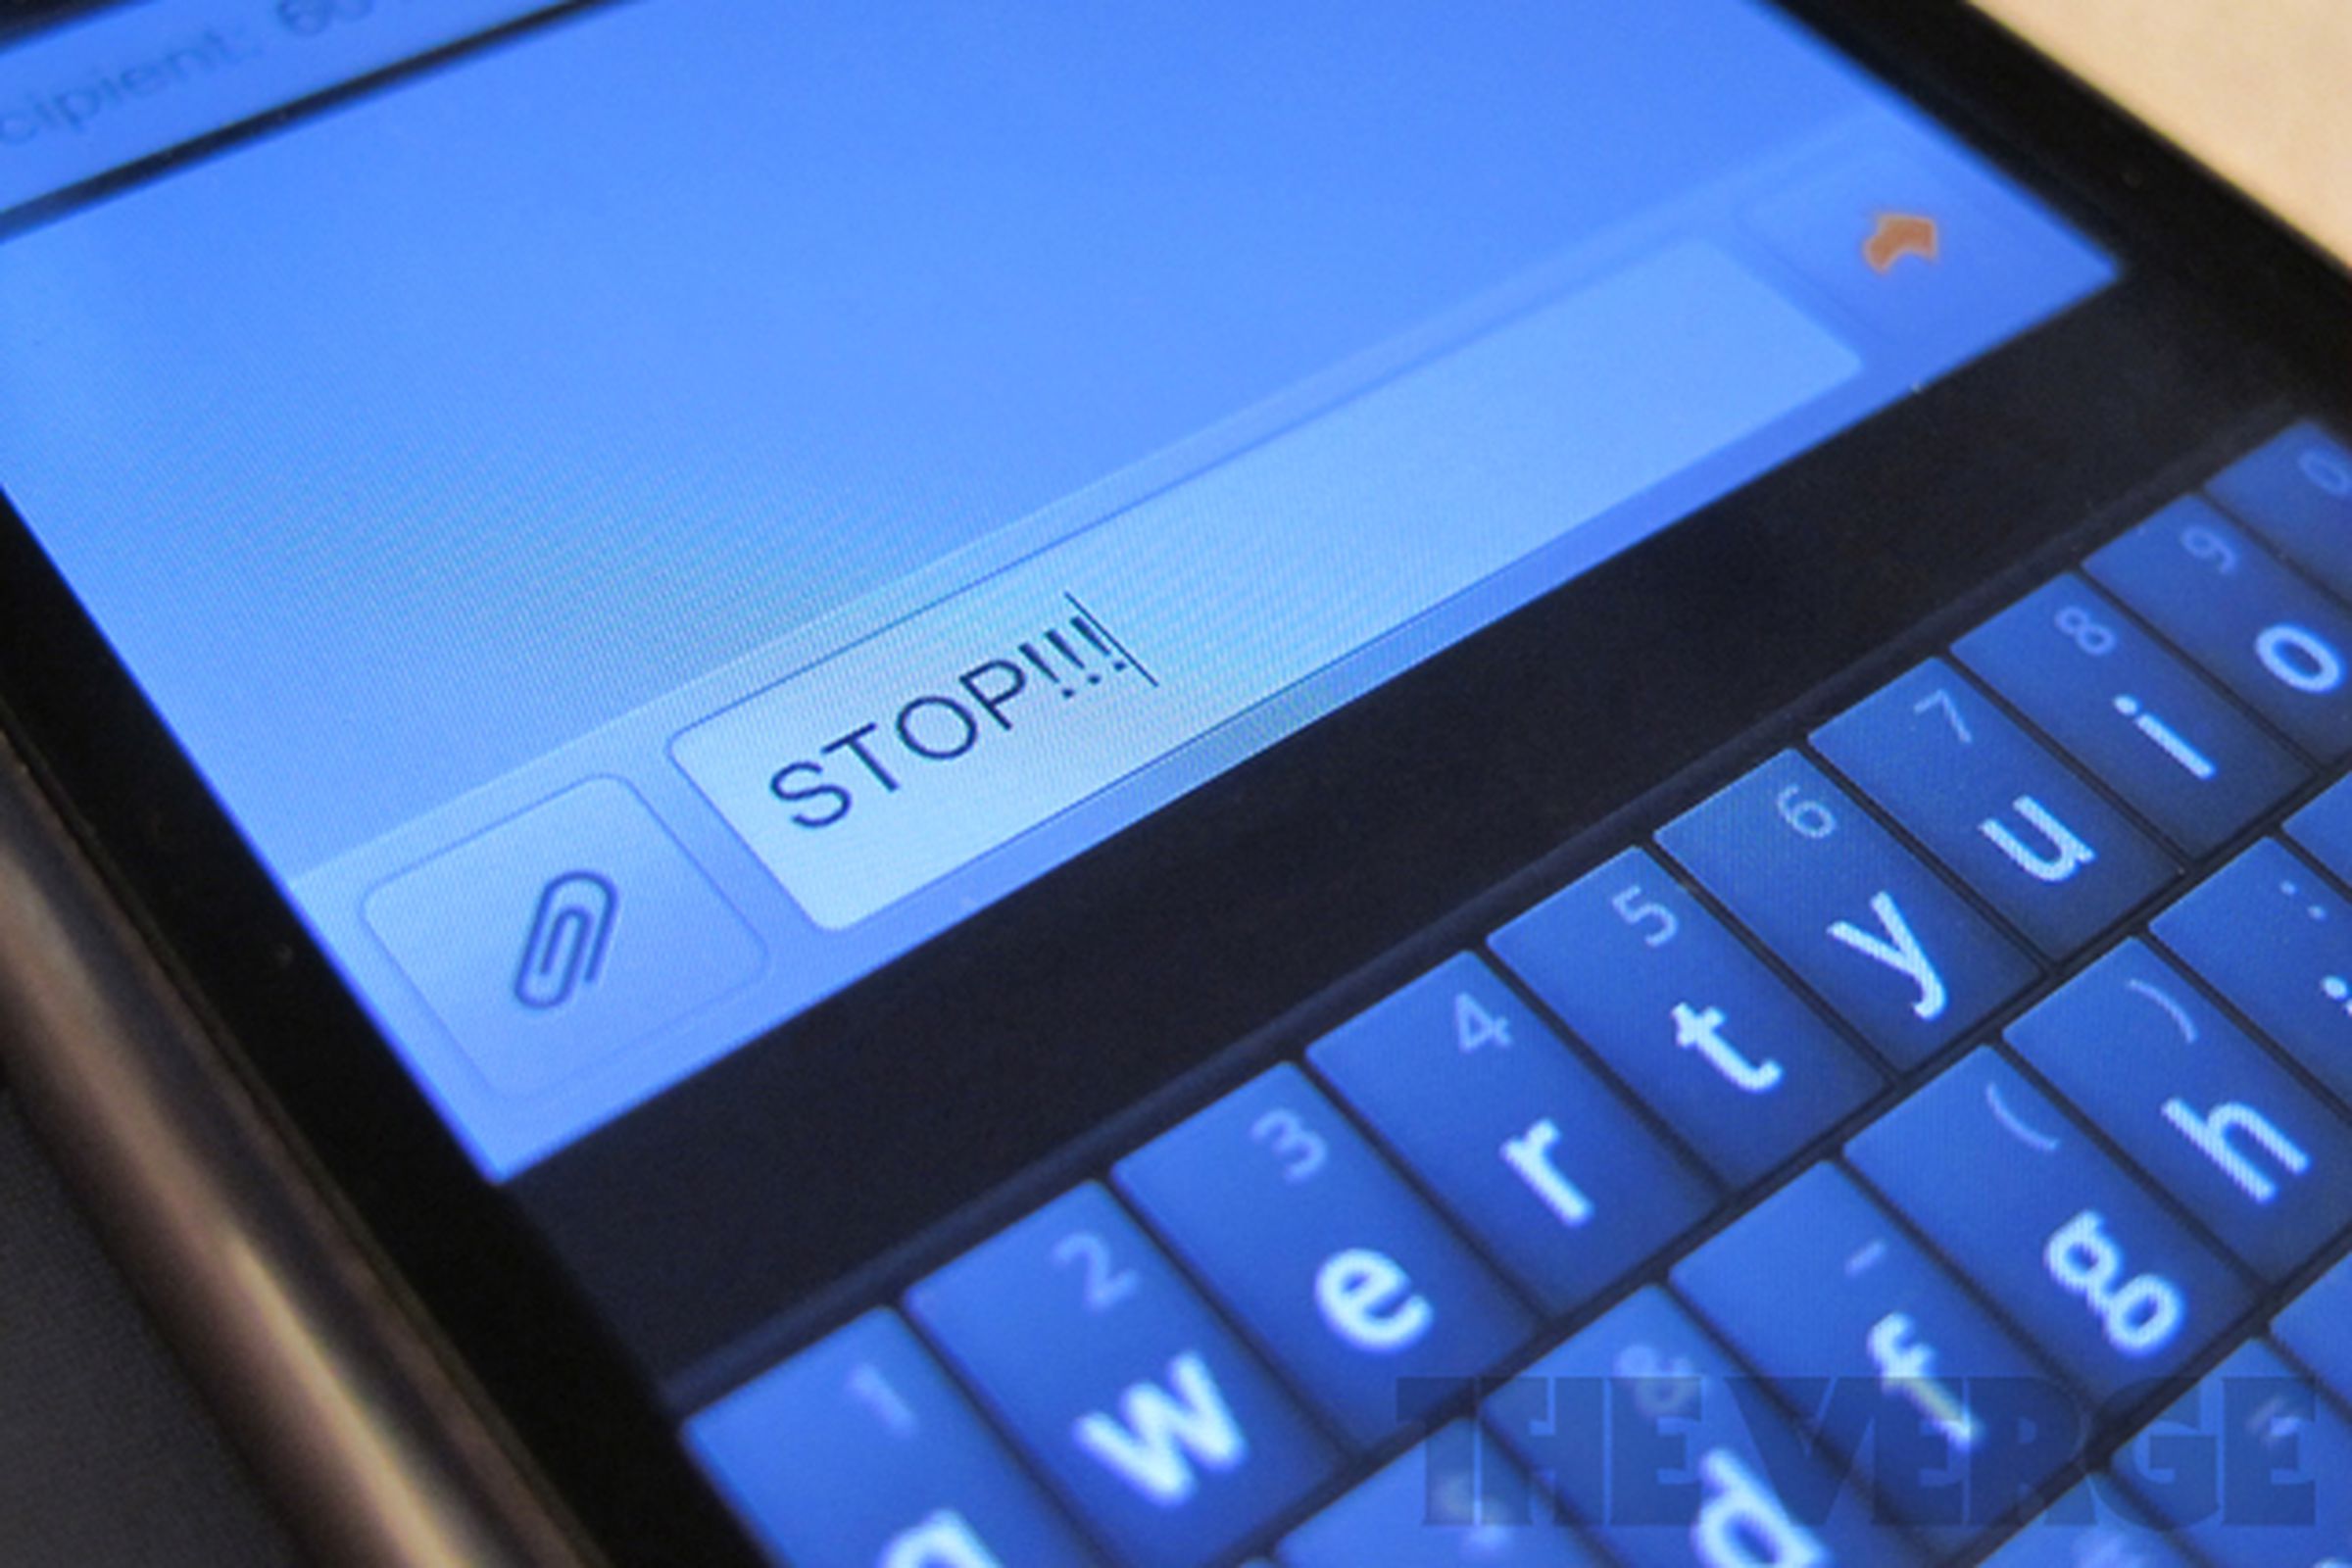 SMS STOP message